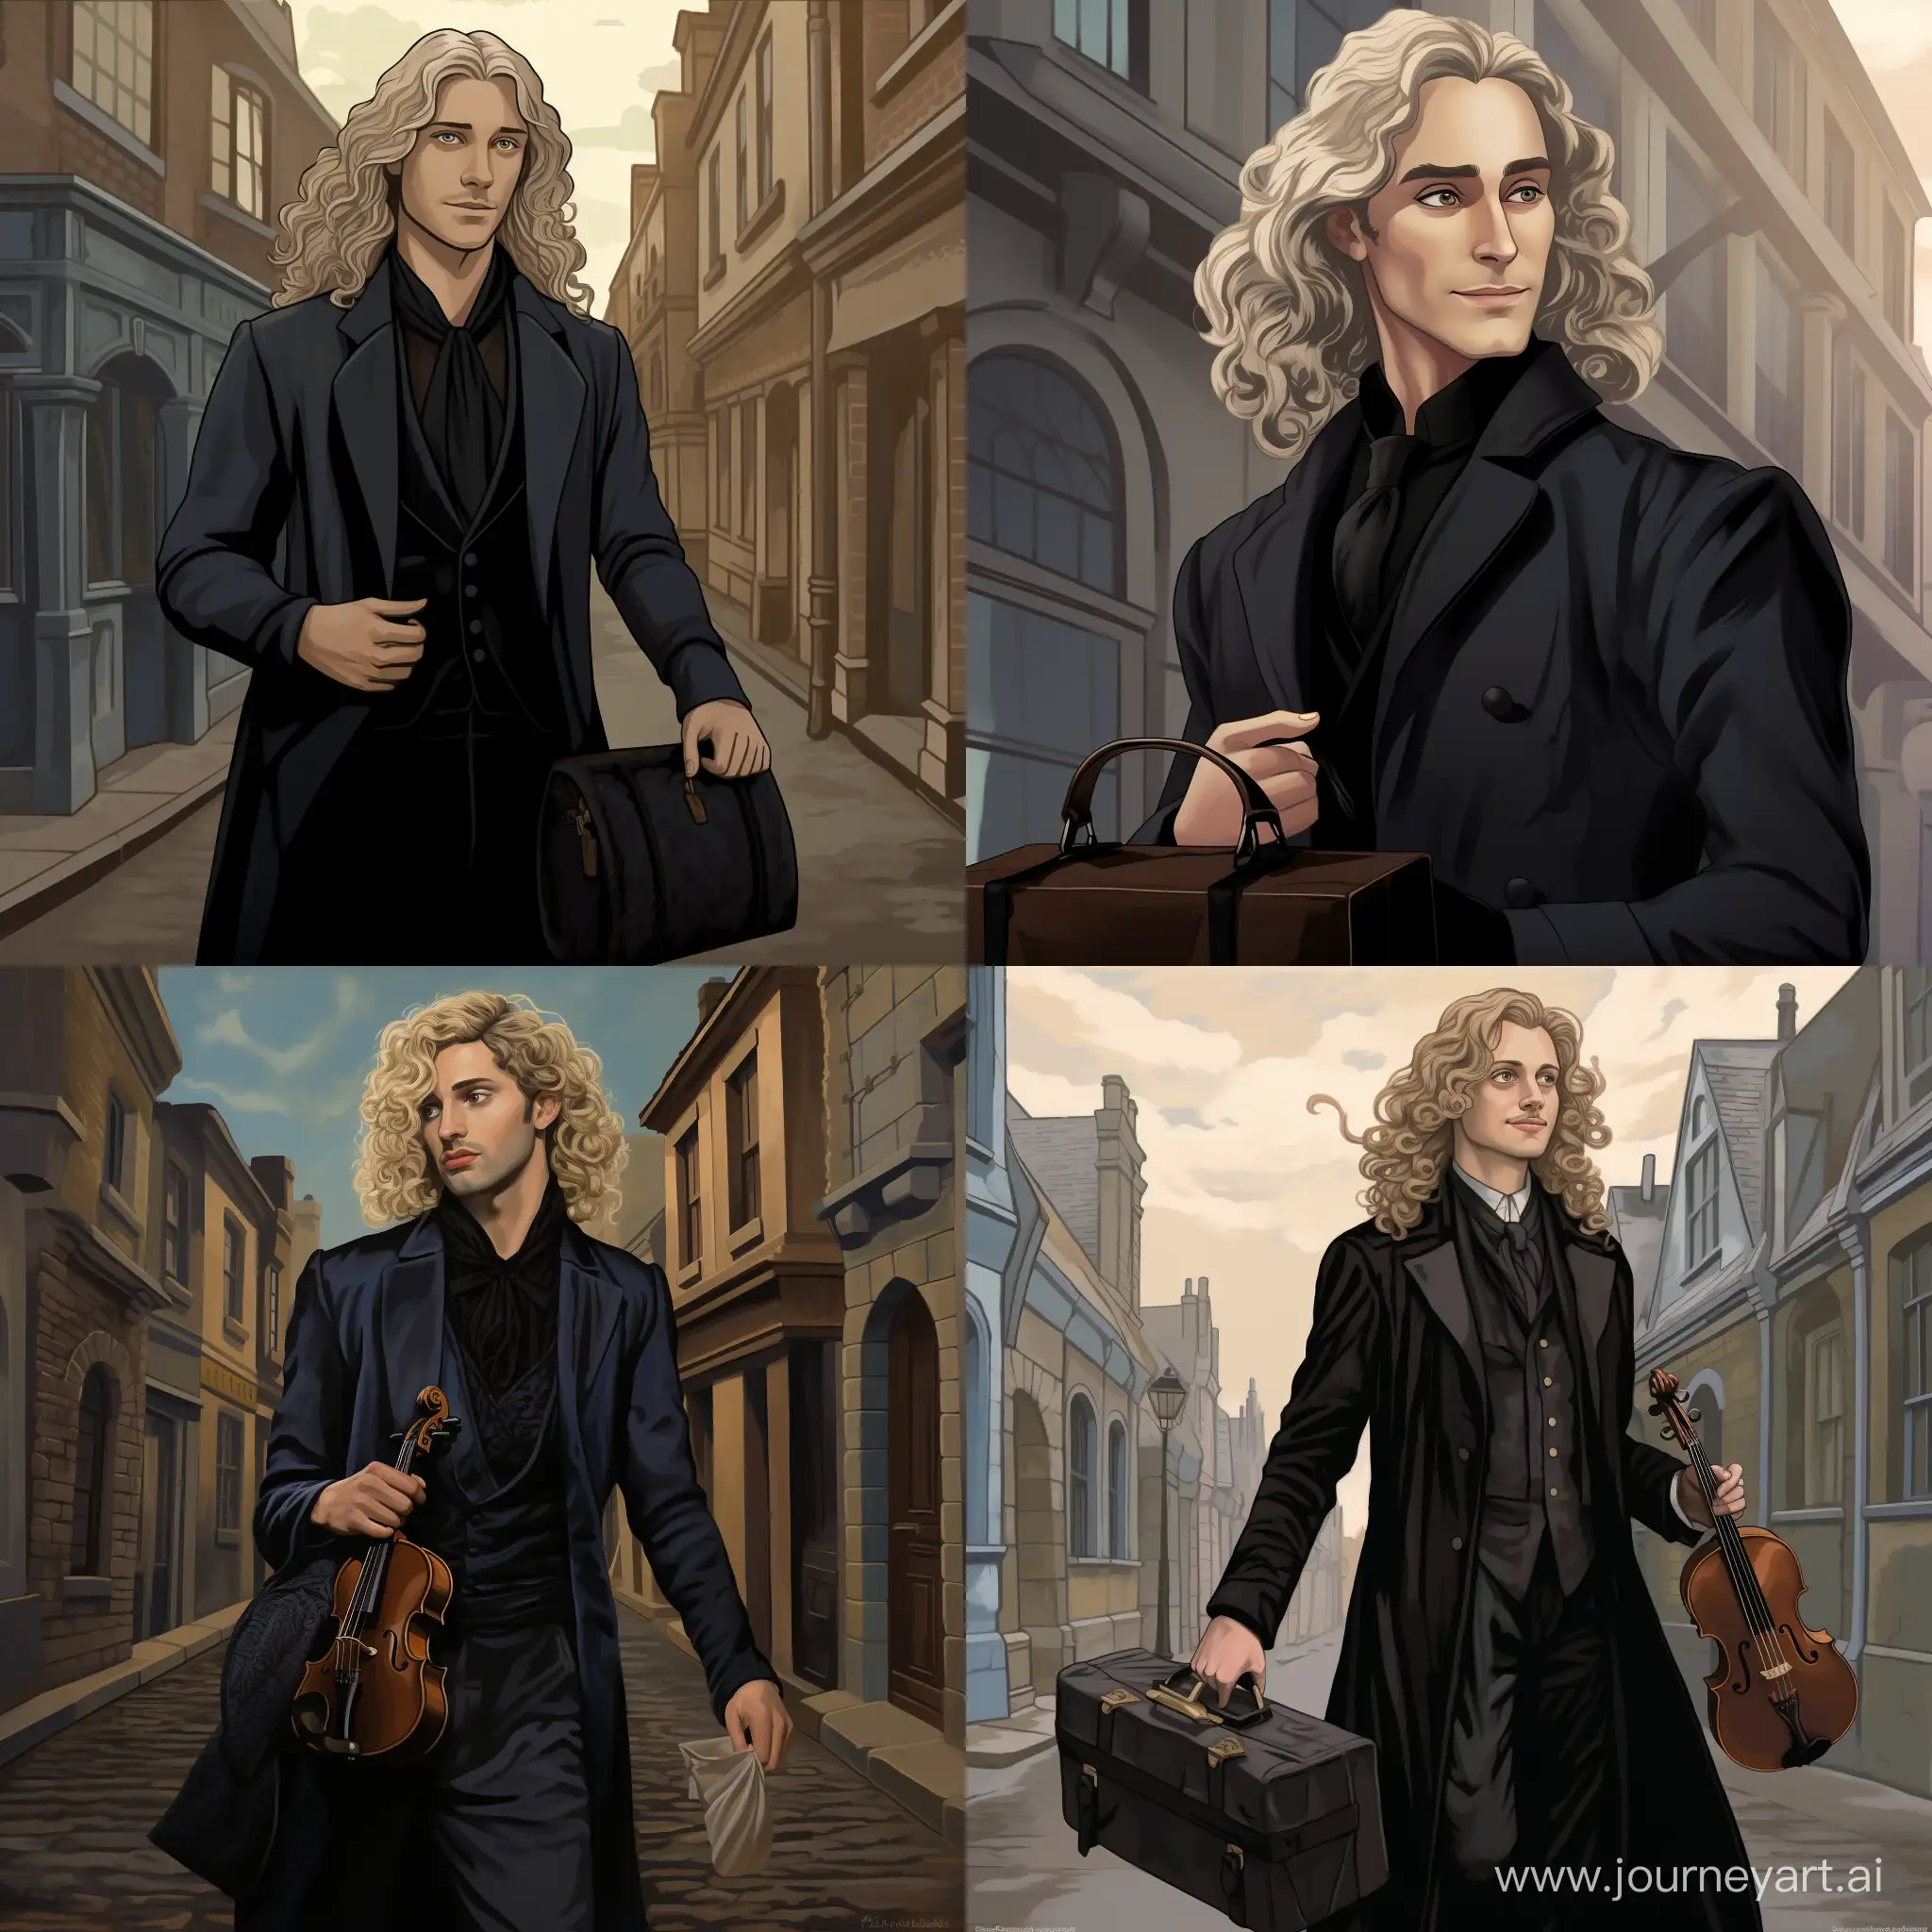 an effeminate man with long curly blonde hair, blue eyes, and pale sking, wearing a black and grey dress similar to Mary Poppins, carrying a large black gladstone bag with golden hinges with both hands, walking down a cobbled street.